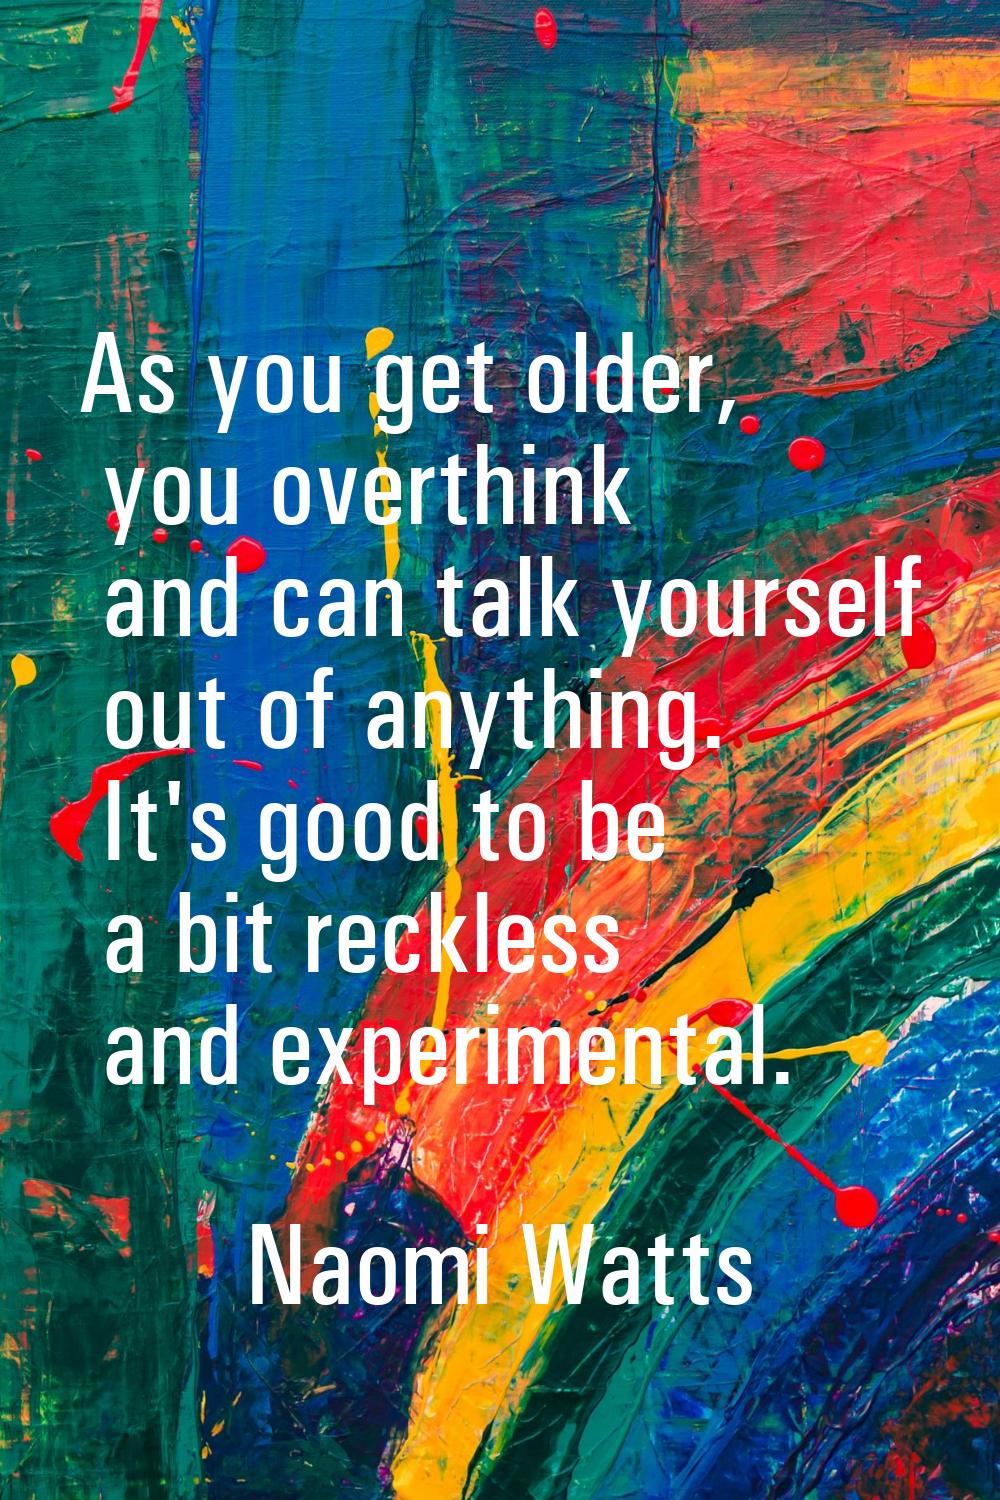 As you get older, you overthink and can talk yourself out of anything. It's good to be a bit reckle